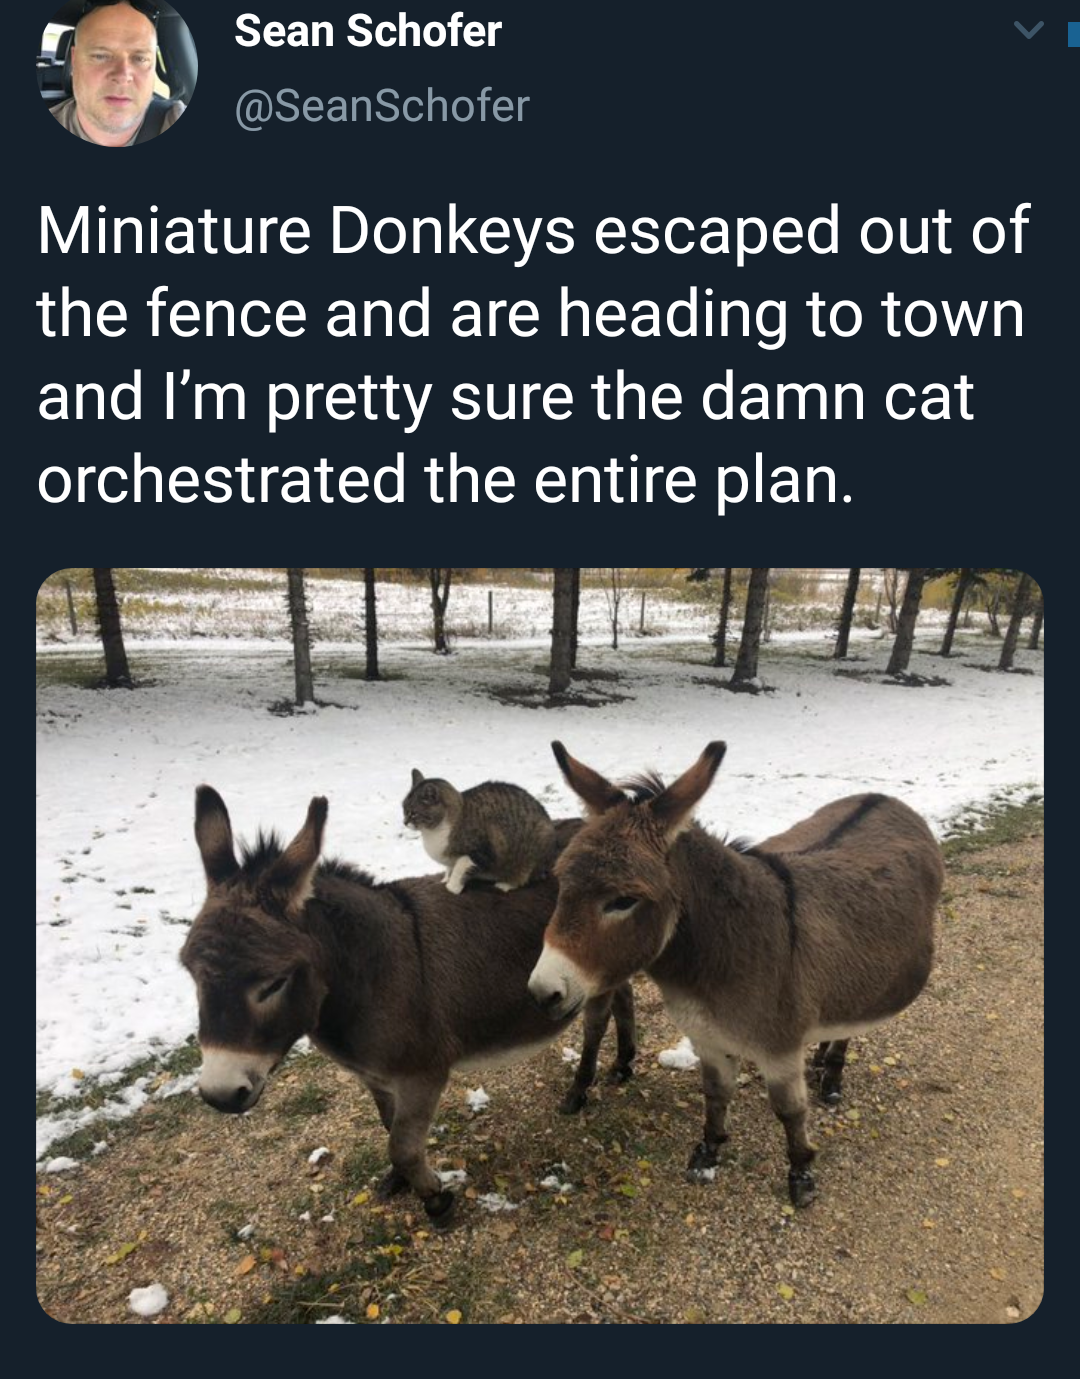 donkey - Sean Schofer Miniature Donkeys escaped out of the fence and are heading to town and I'm pretty sure the damn cat orchestrated the entire plan.